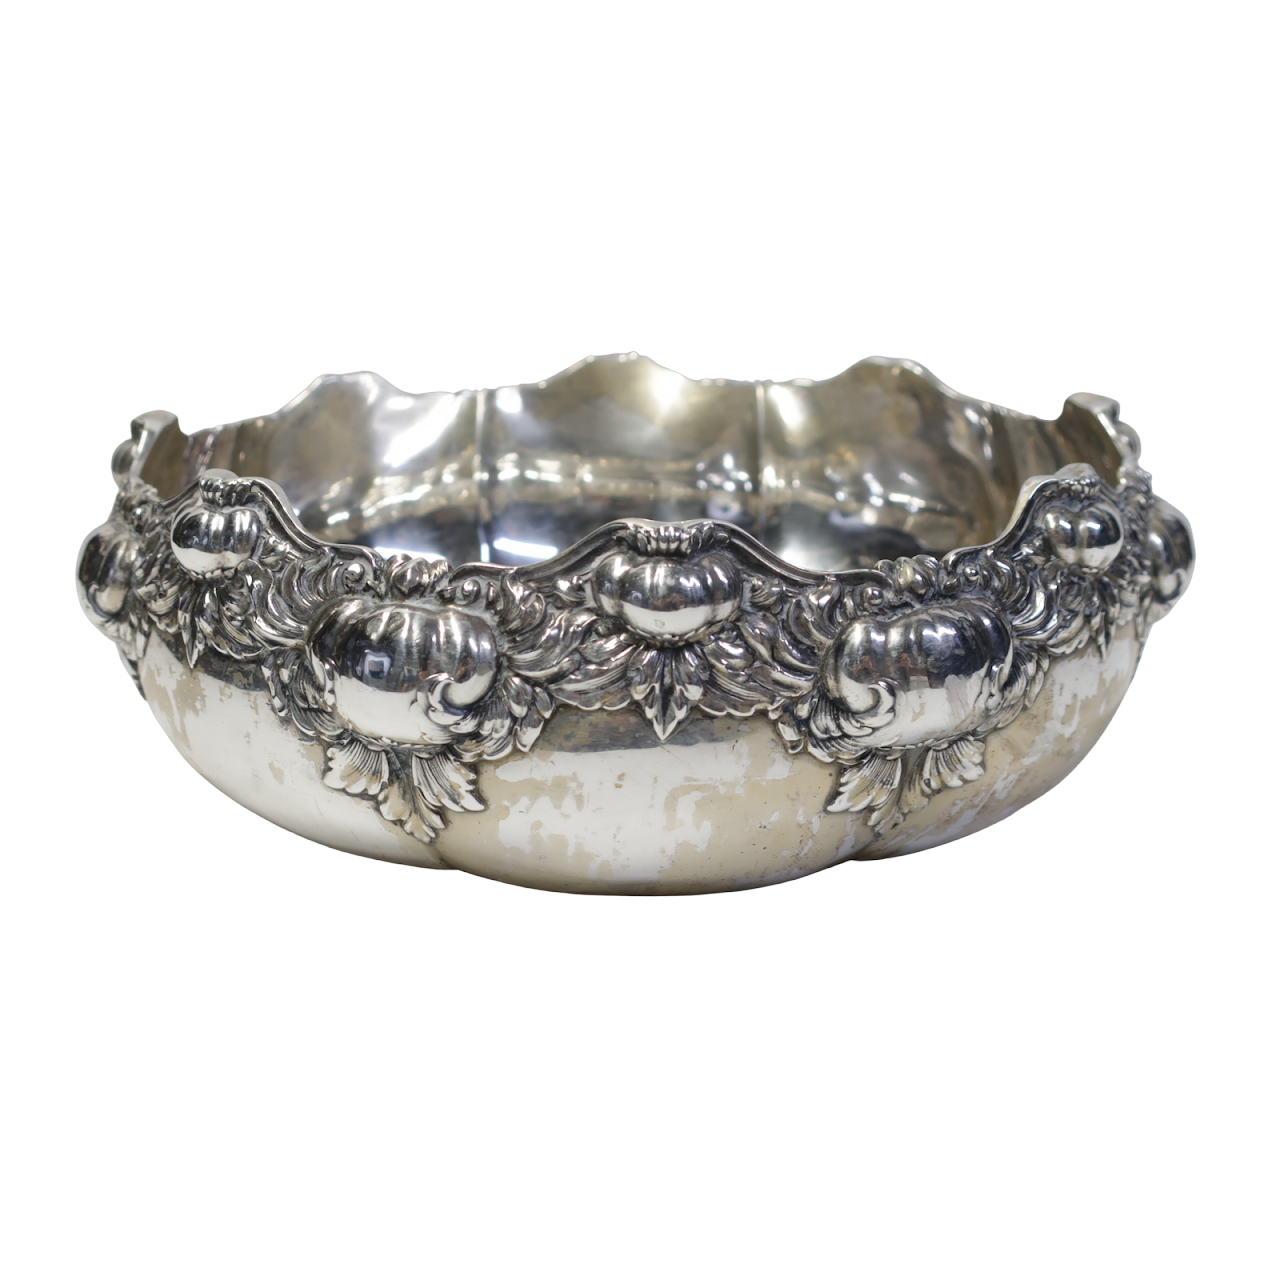 Tiffany & Co. Antique Sterling Silver Bowl